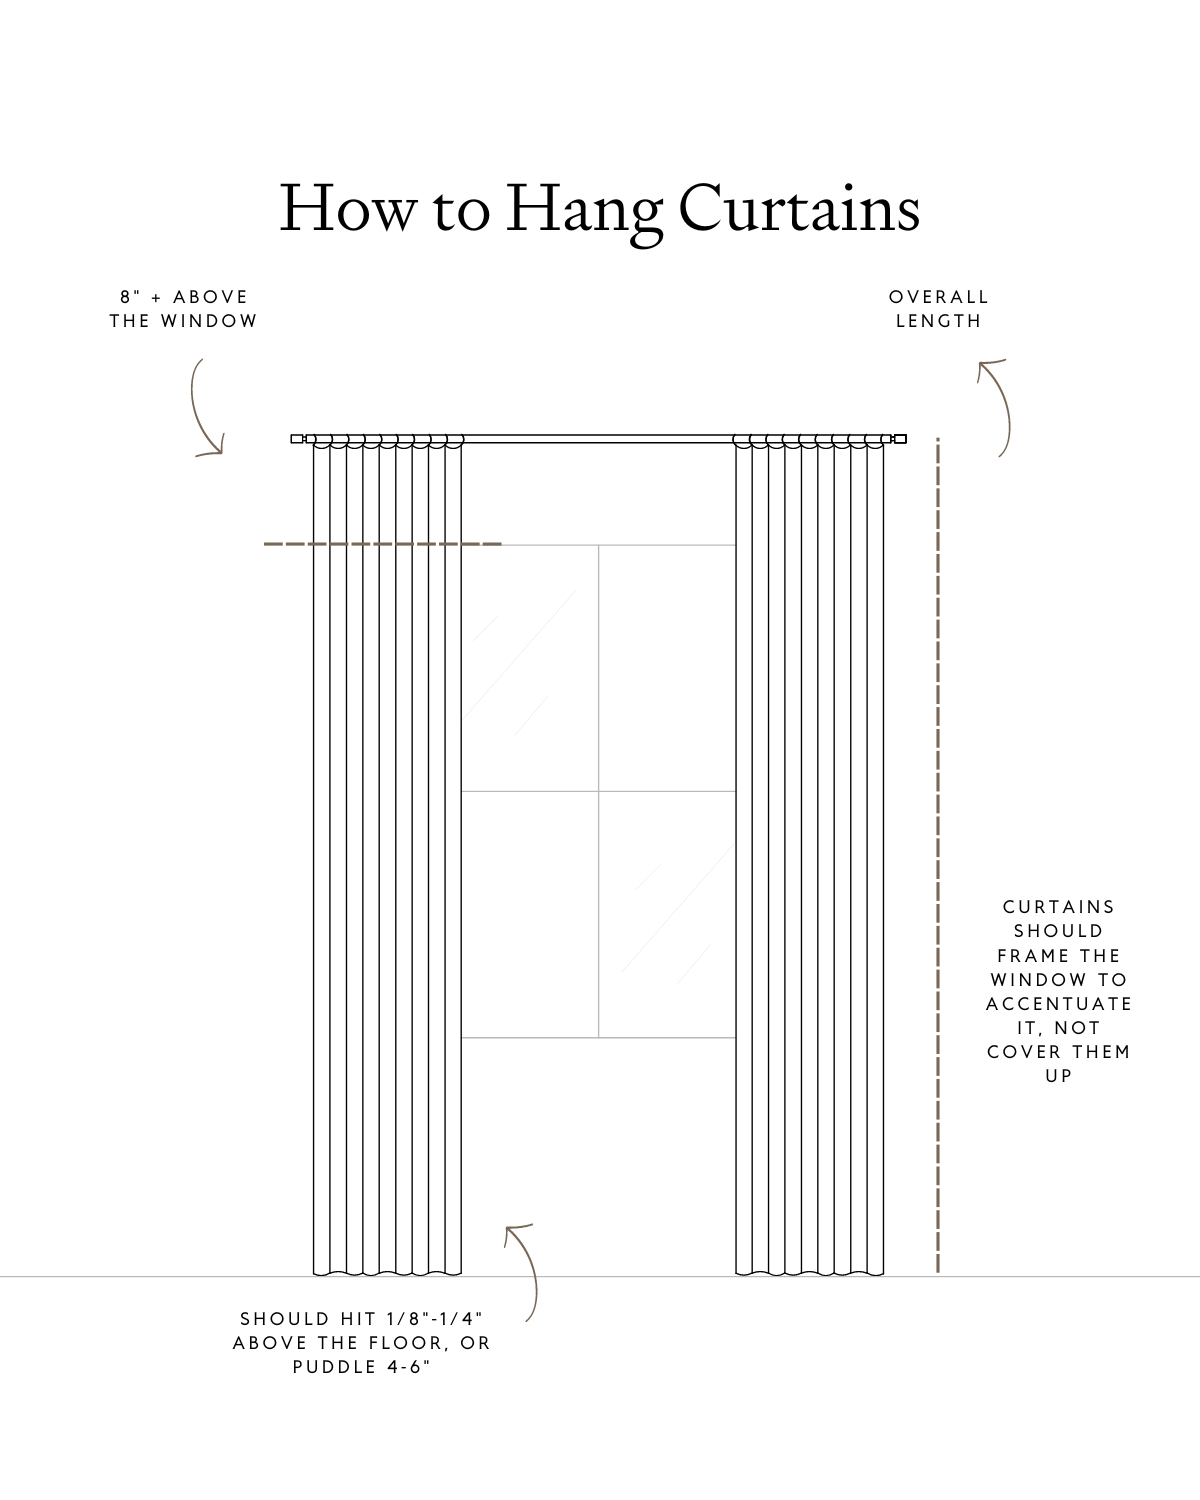 Step-by-step guide on high-hanging curtains: Learn the dimensions and techniques for perfect curtain placement.